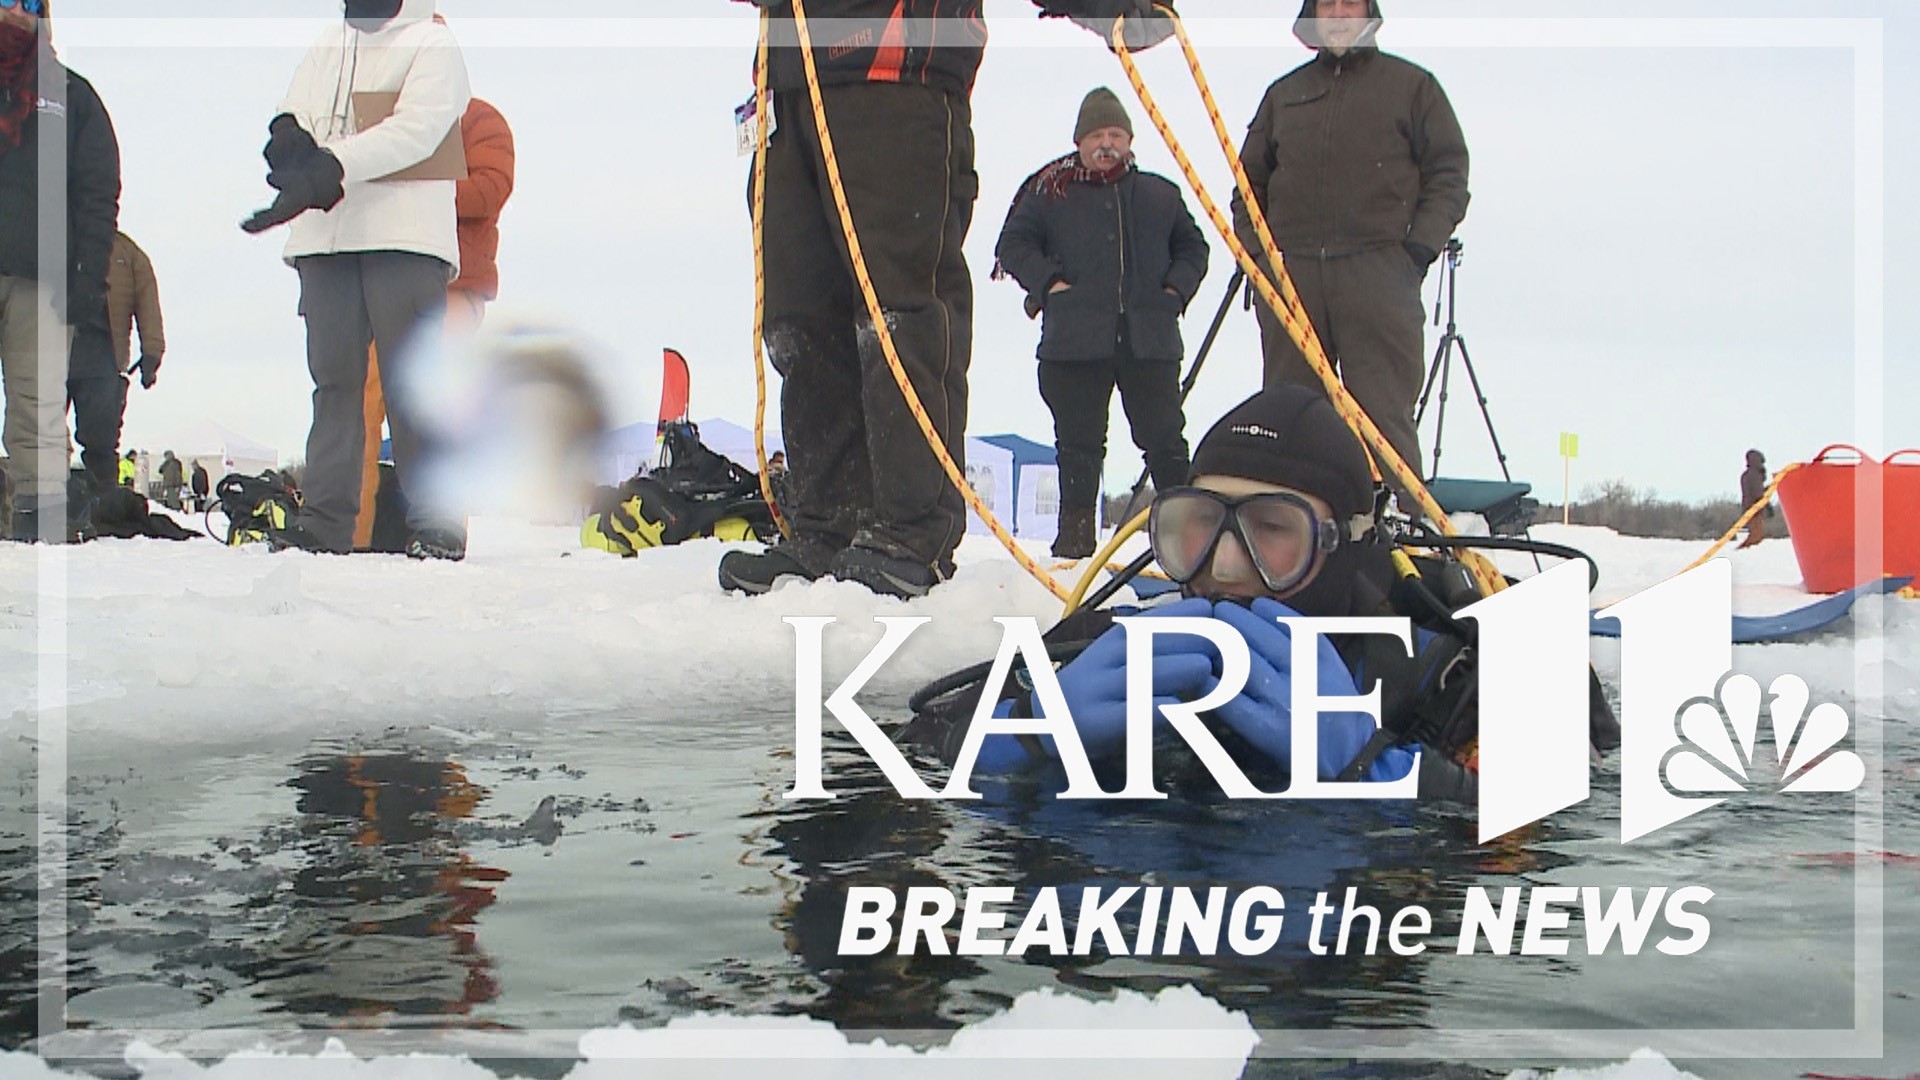 The Ice Festival on White Bear Lake unofficially broke the world record of the most ice scuba divers at a single event.